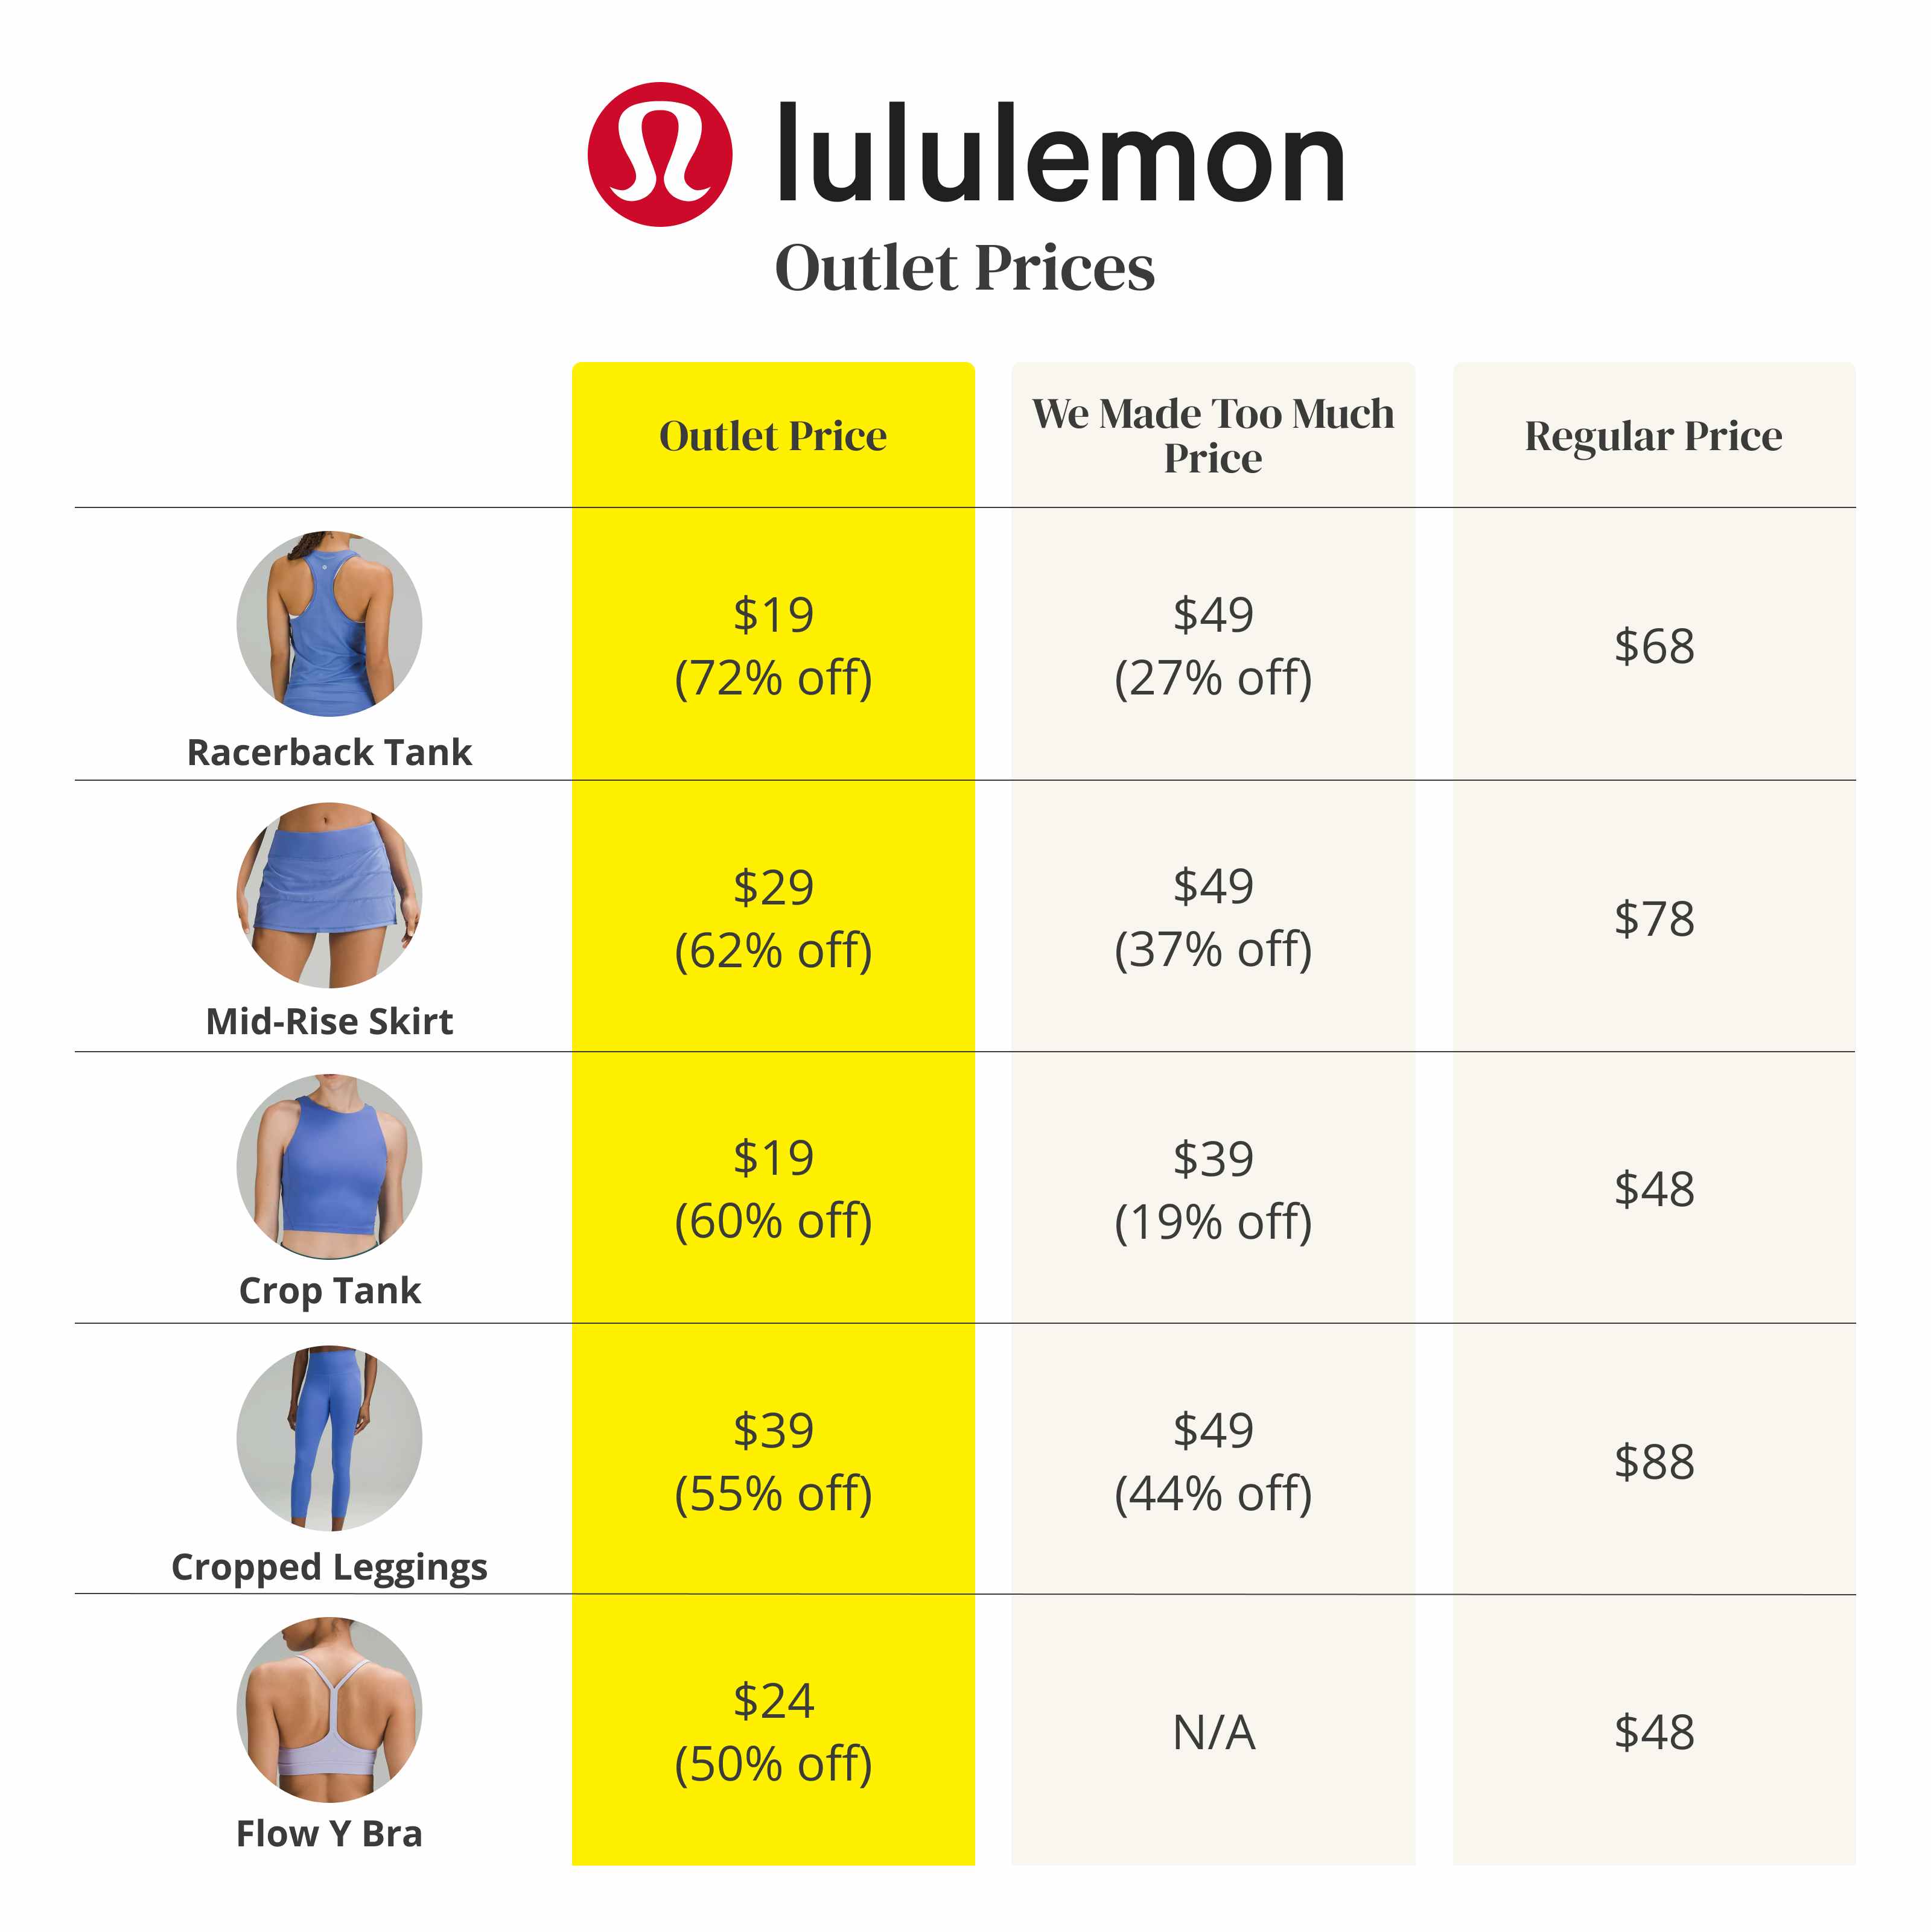 Lululemon Outlet prices compared to regular prices and We Made Too Much savings.